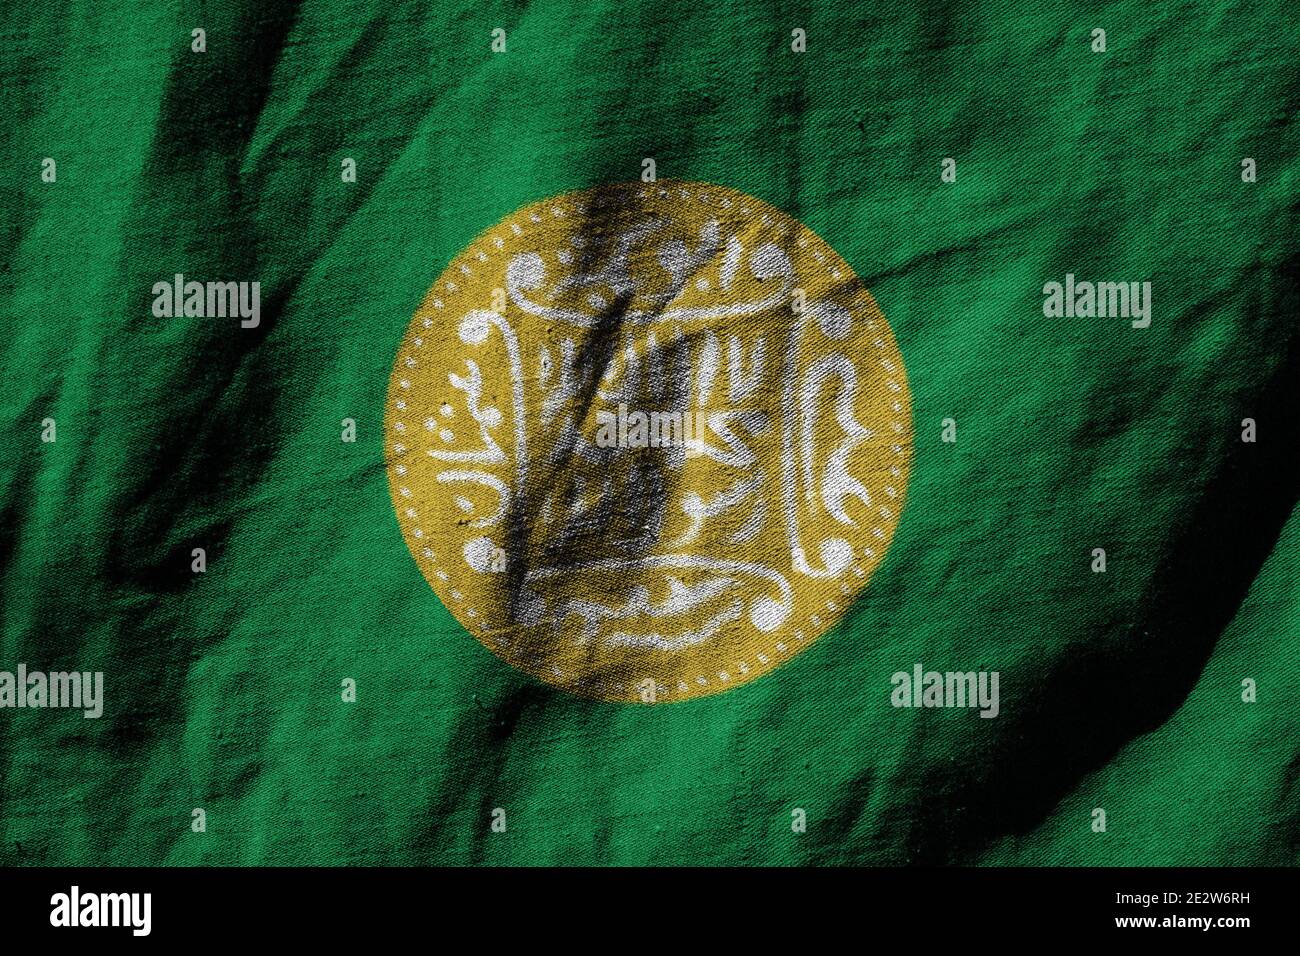 Rohingya flag waving in the wind, Close-up Stock Photo